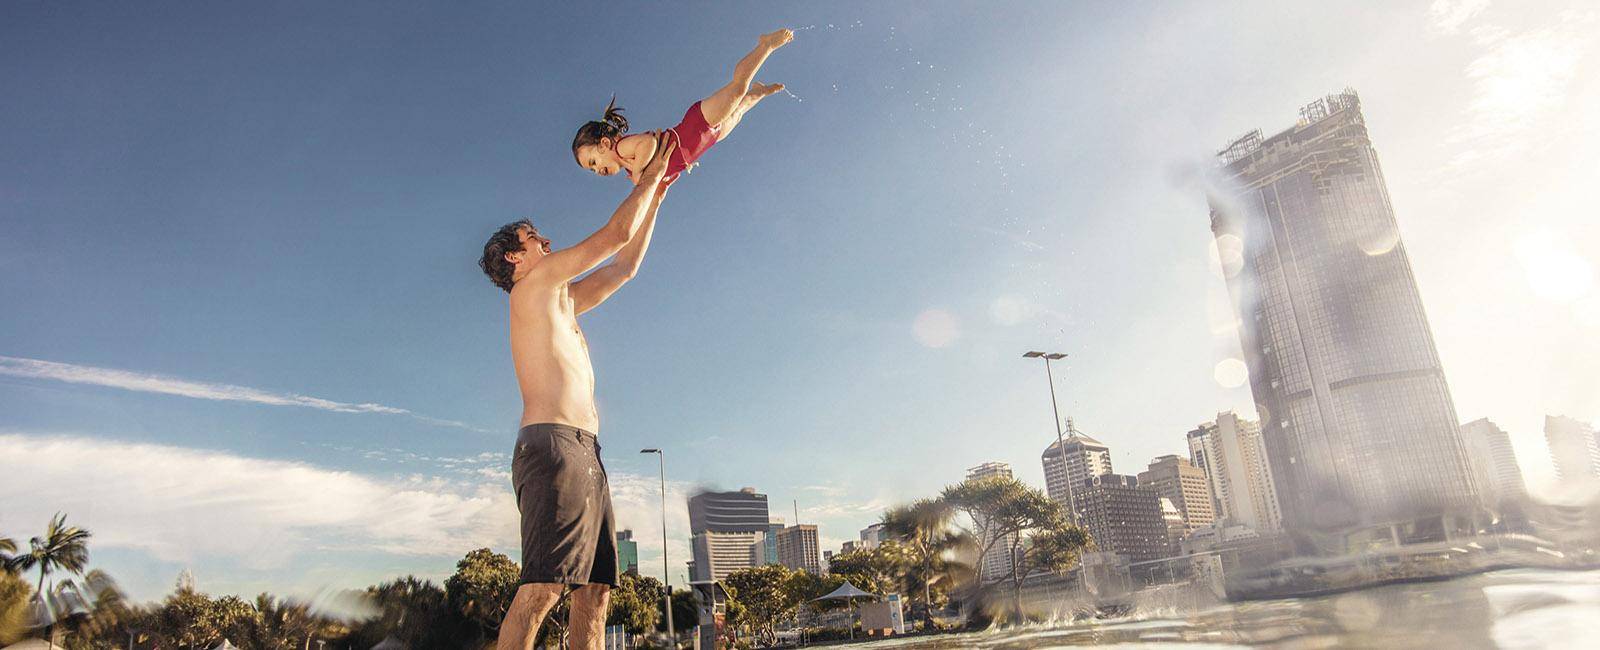 Streets Beach South Bank | 15 cool family fun activities